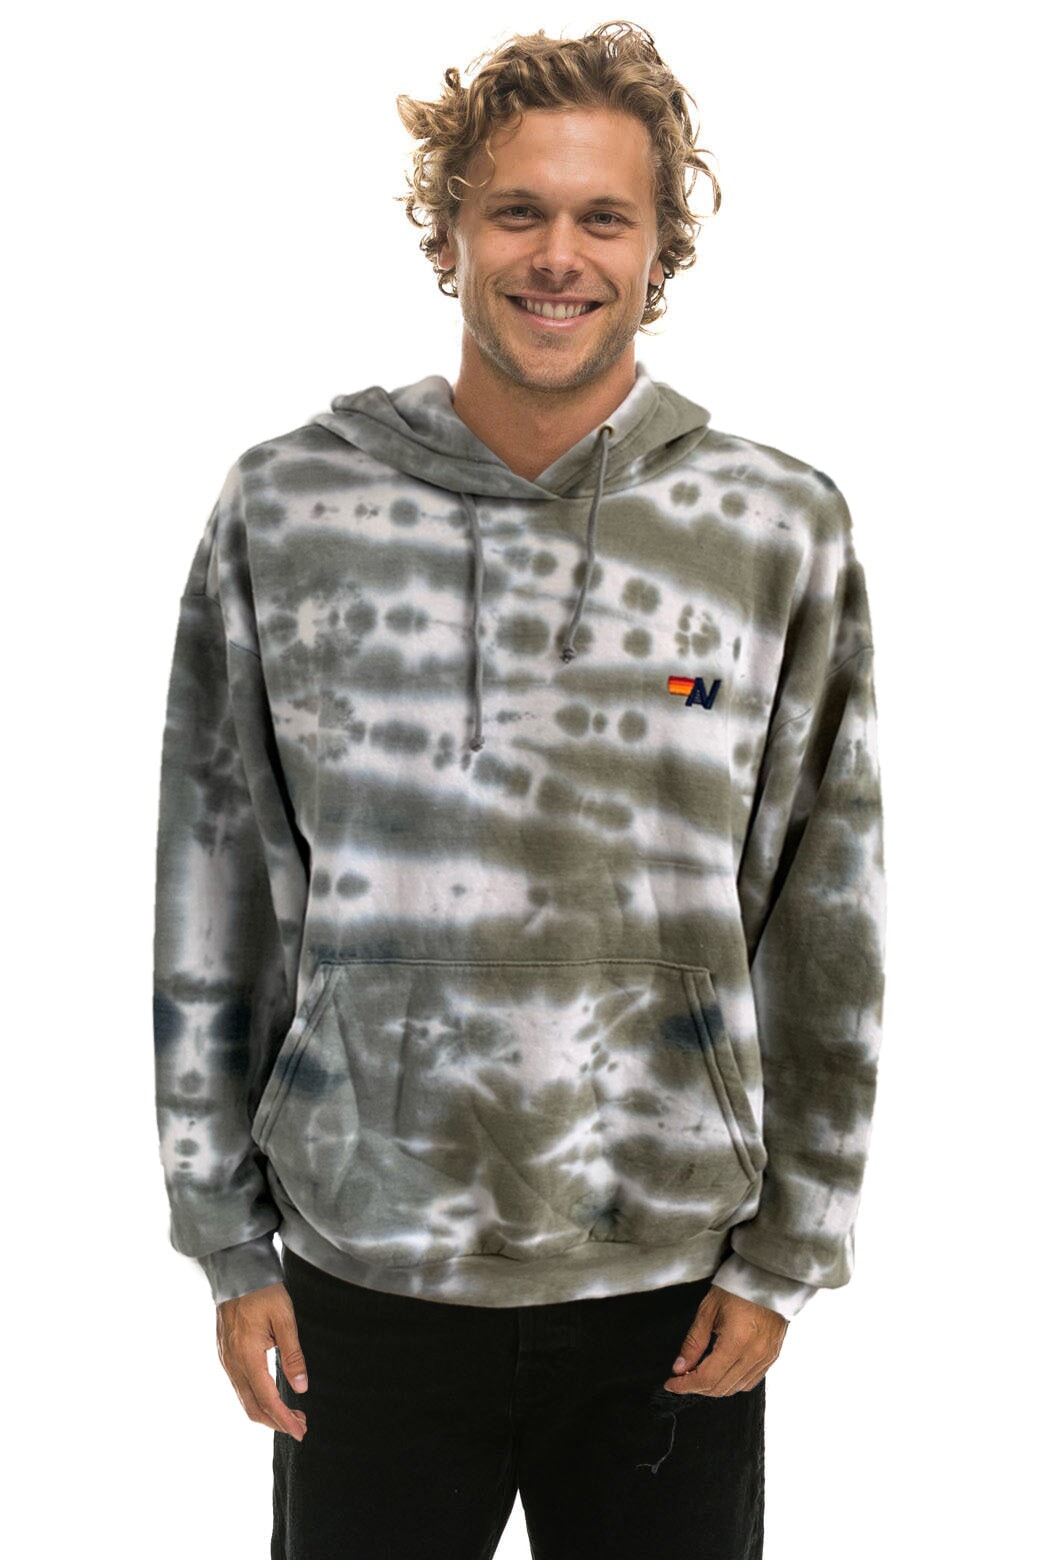 HAND DYED PULLOVER HOODIE RELAXED - TIE DYE GREY // OLIVE Hoodie Aviator Nation 